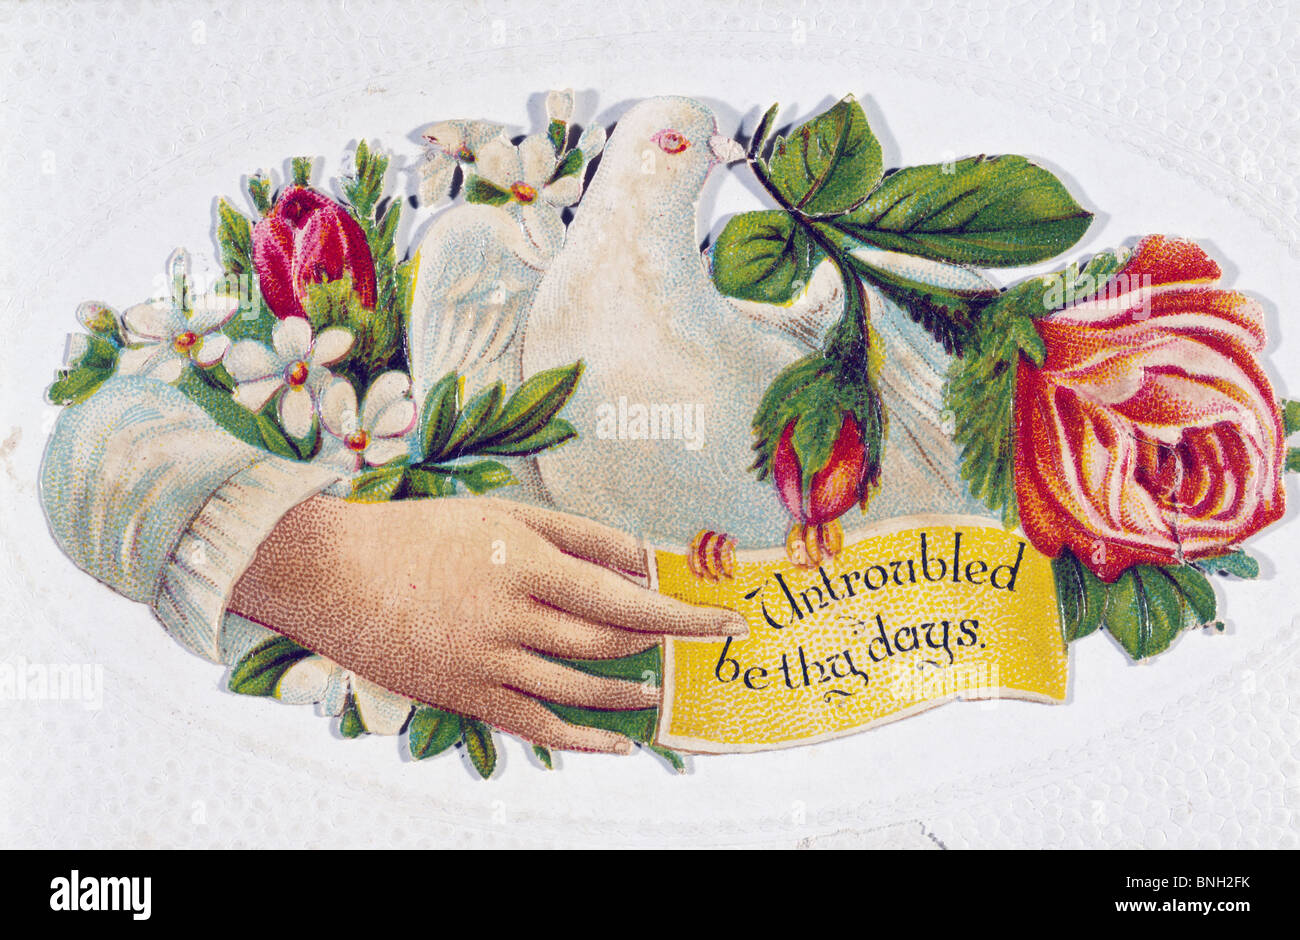 Untroubled Be Thy Days, Nostalgia Cards, Stock Photo